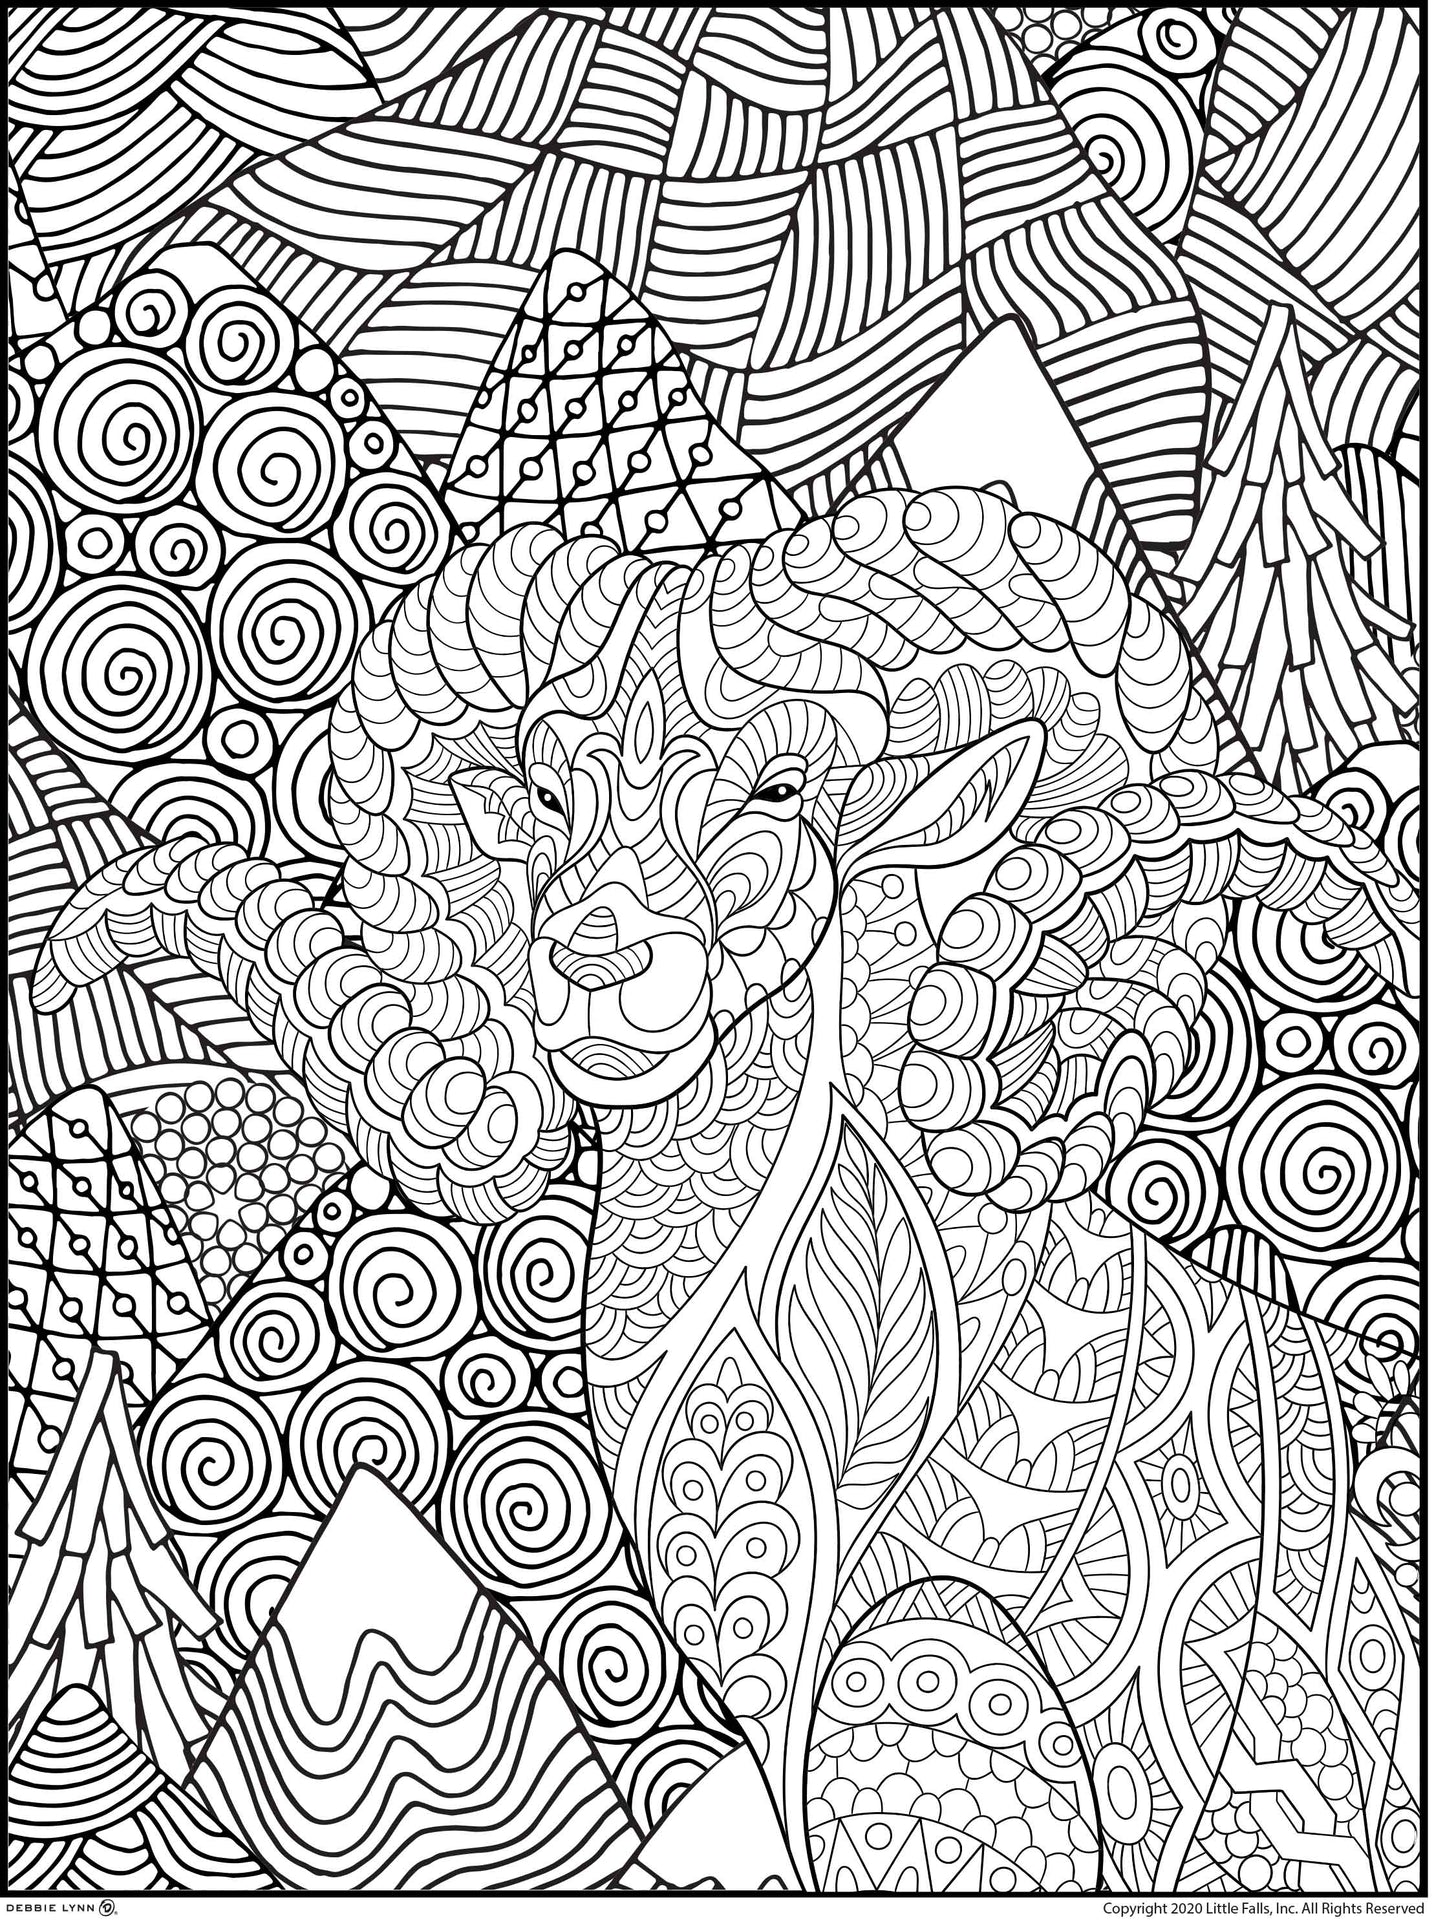 Ram Personalized Giant Coloring Poster 46"x60"